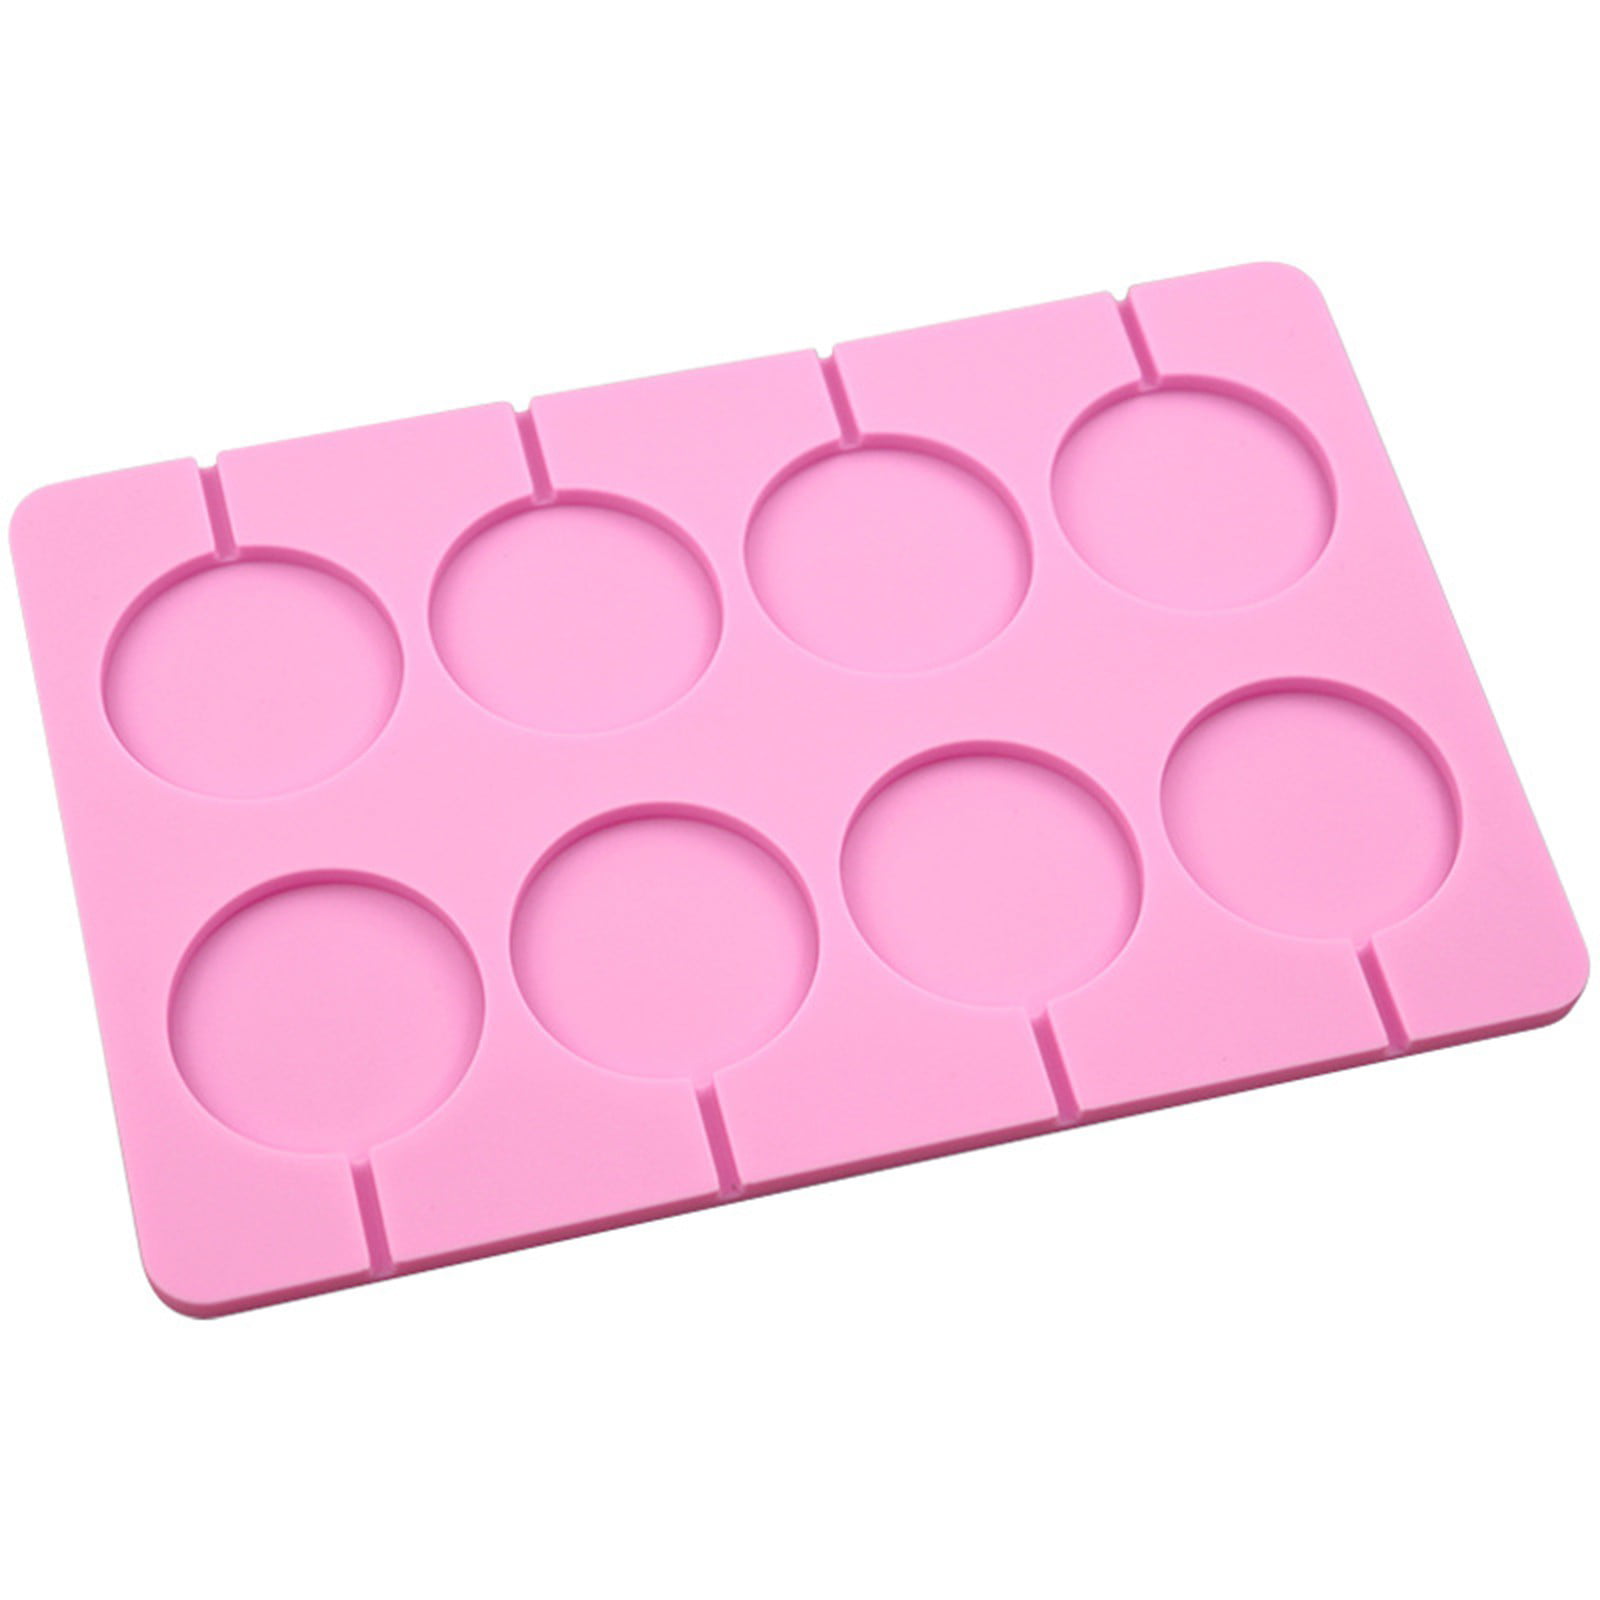 Silicone Cake Lollipop Moulds x 20 with Sticks 